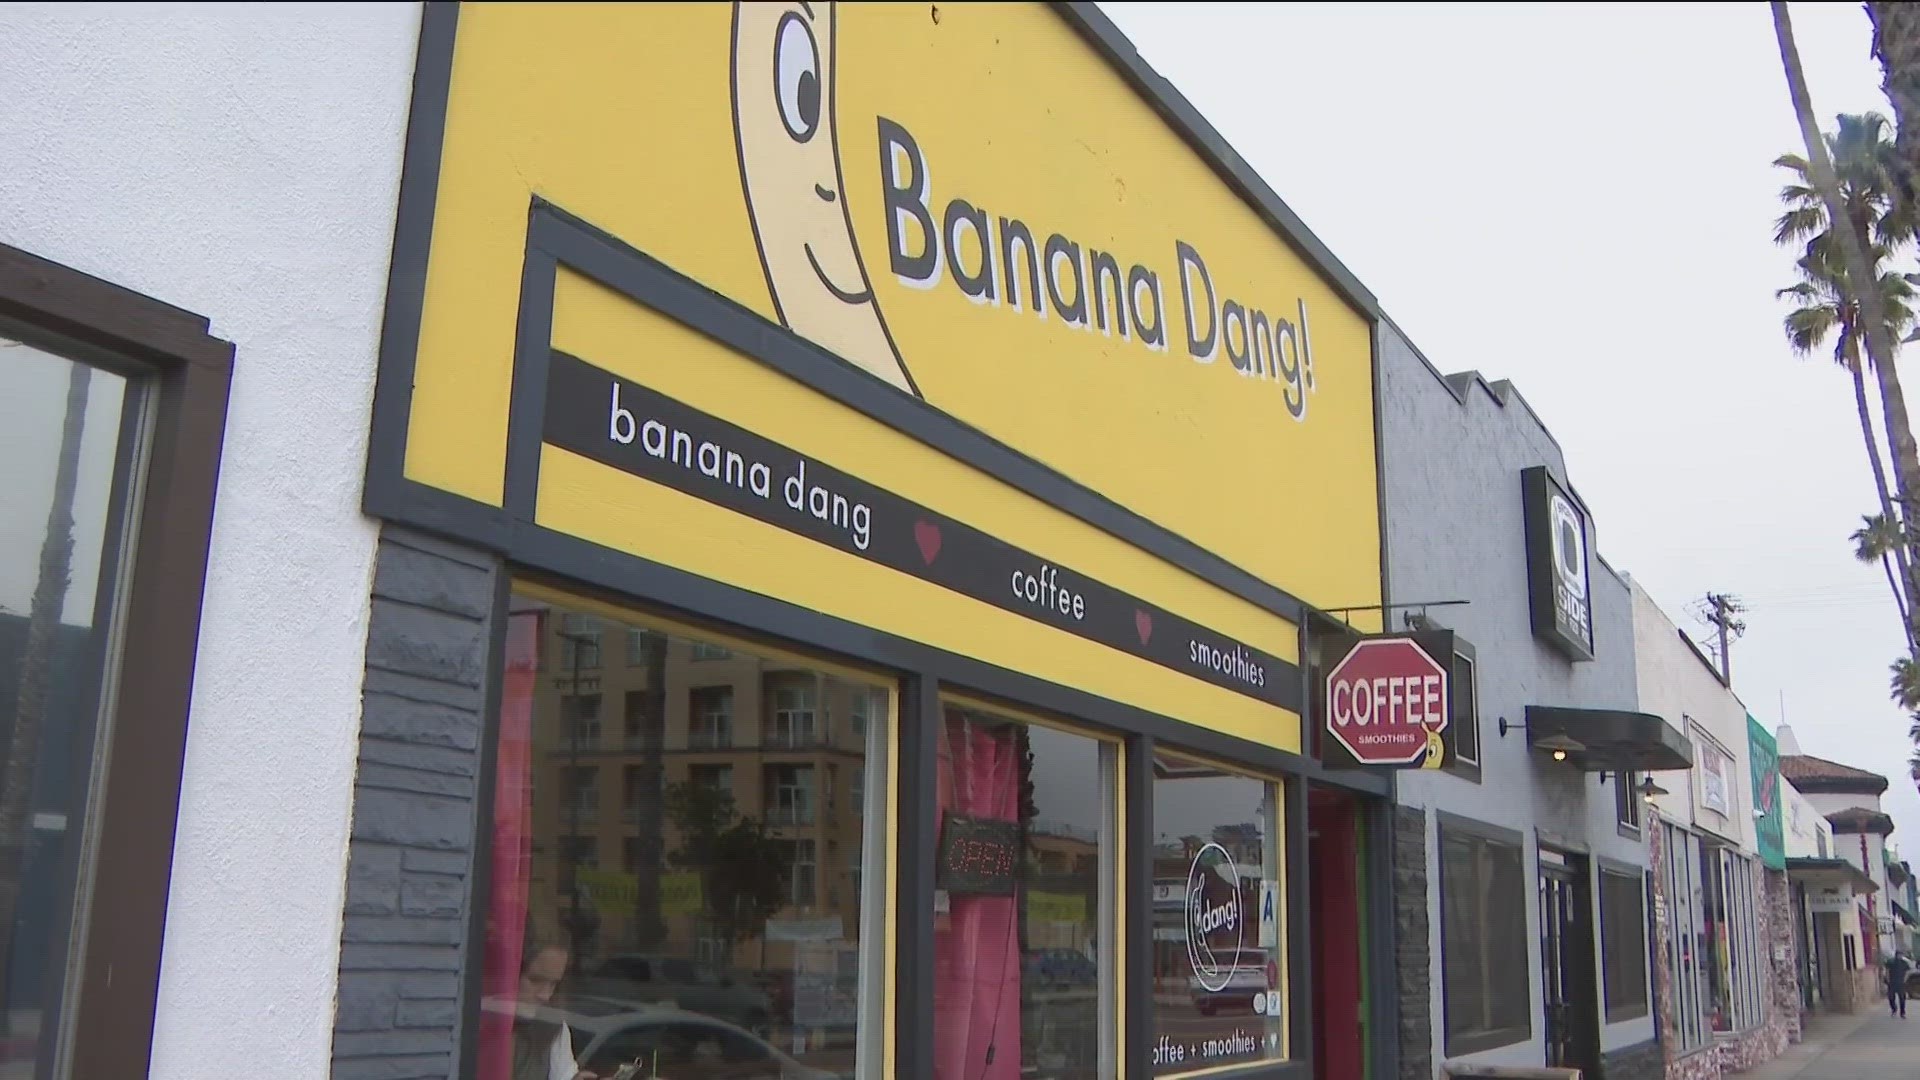 Banana Dang is an Oceanside coffee shop that makes smoothies and specialty coffees that they say is much better than big chains.